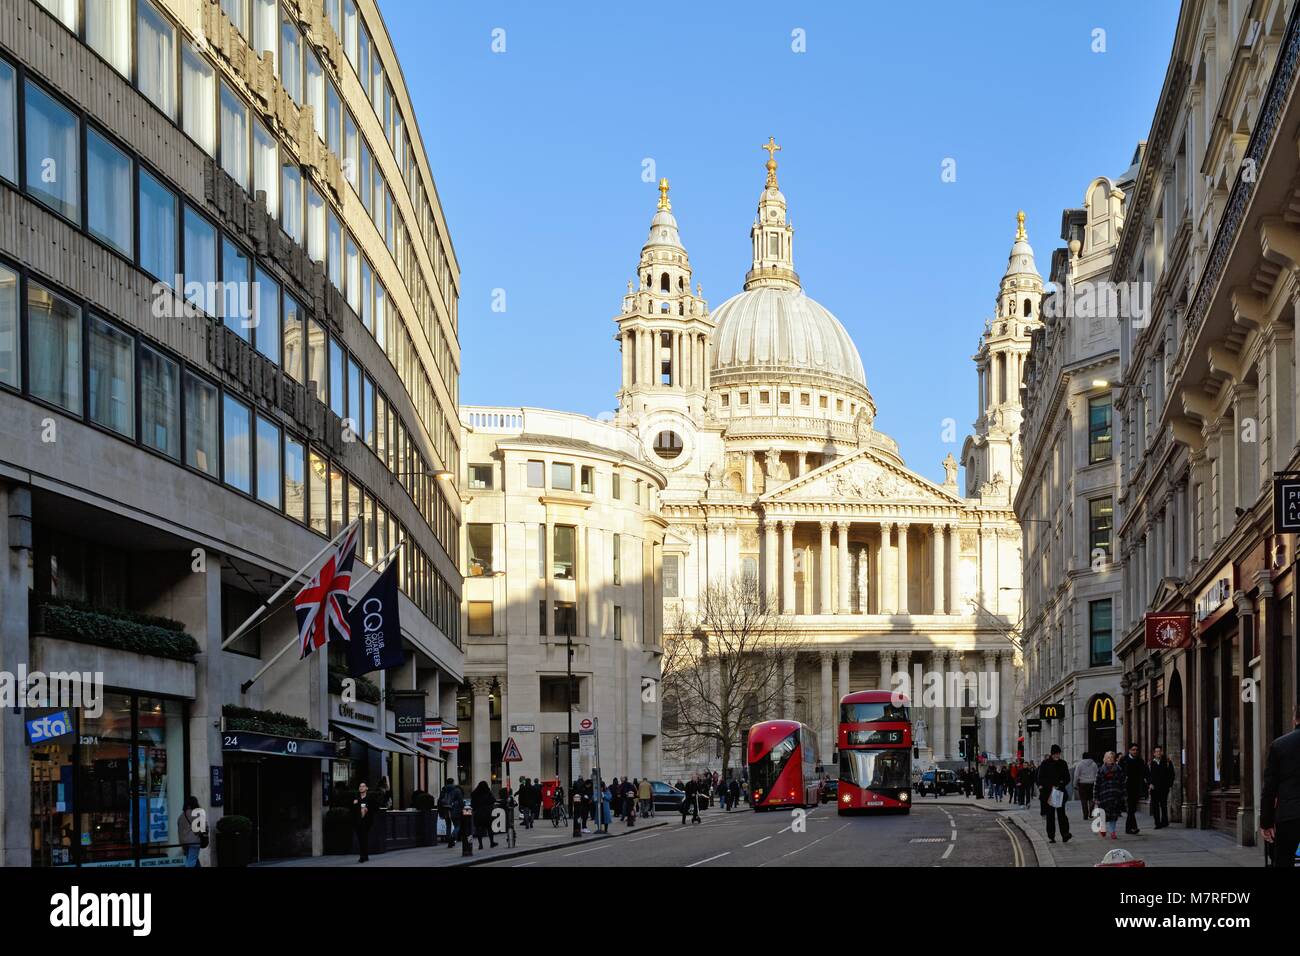 The view of St.Pauls cathedral from Ludgate Hill, City of London England UK Stock Photo